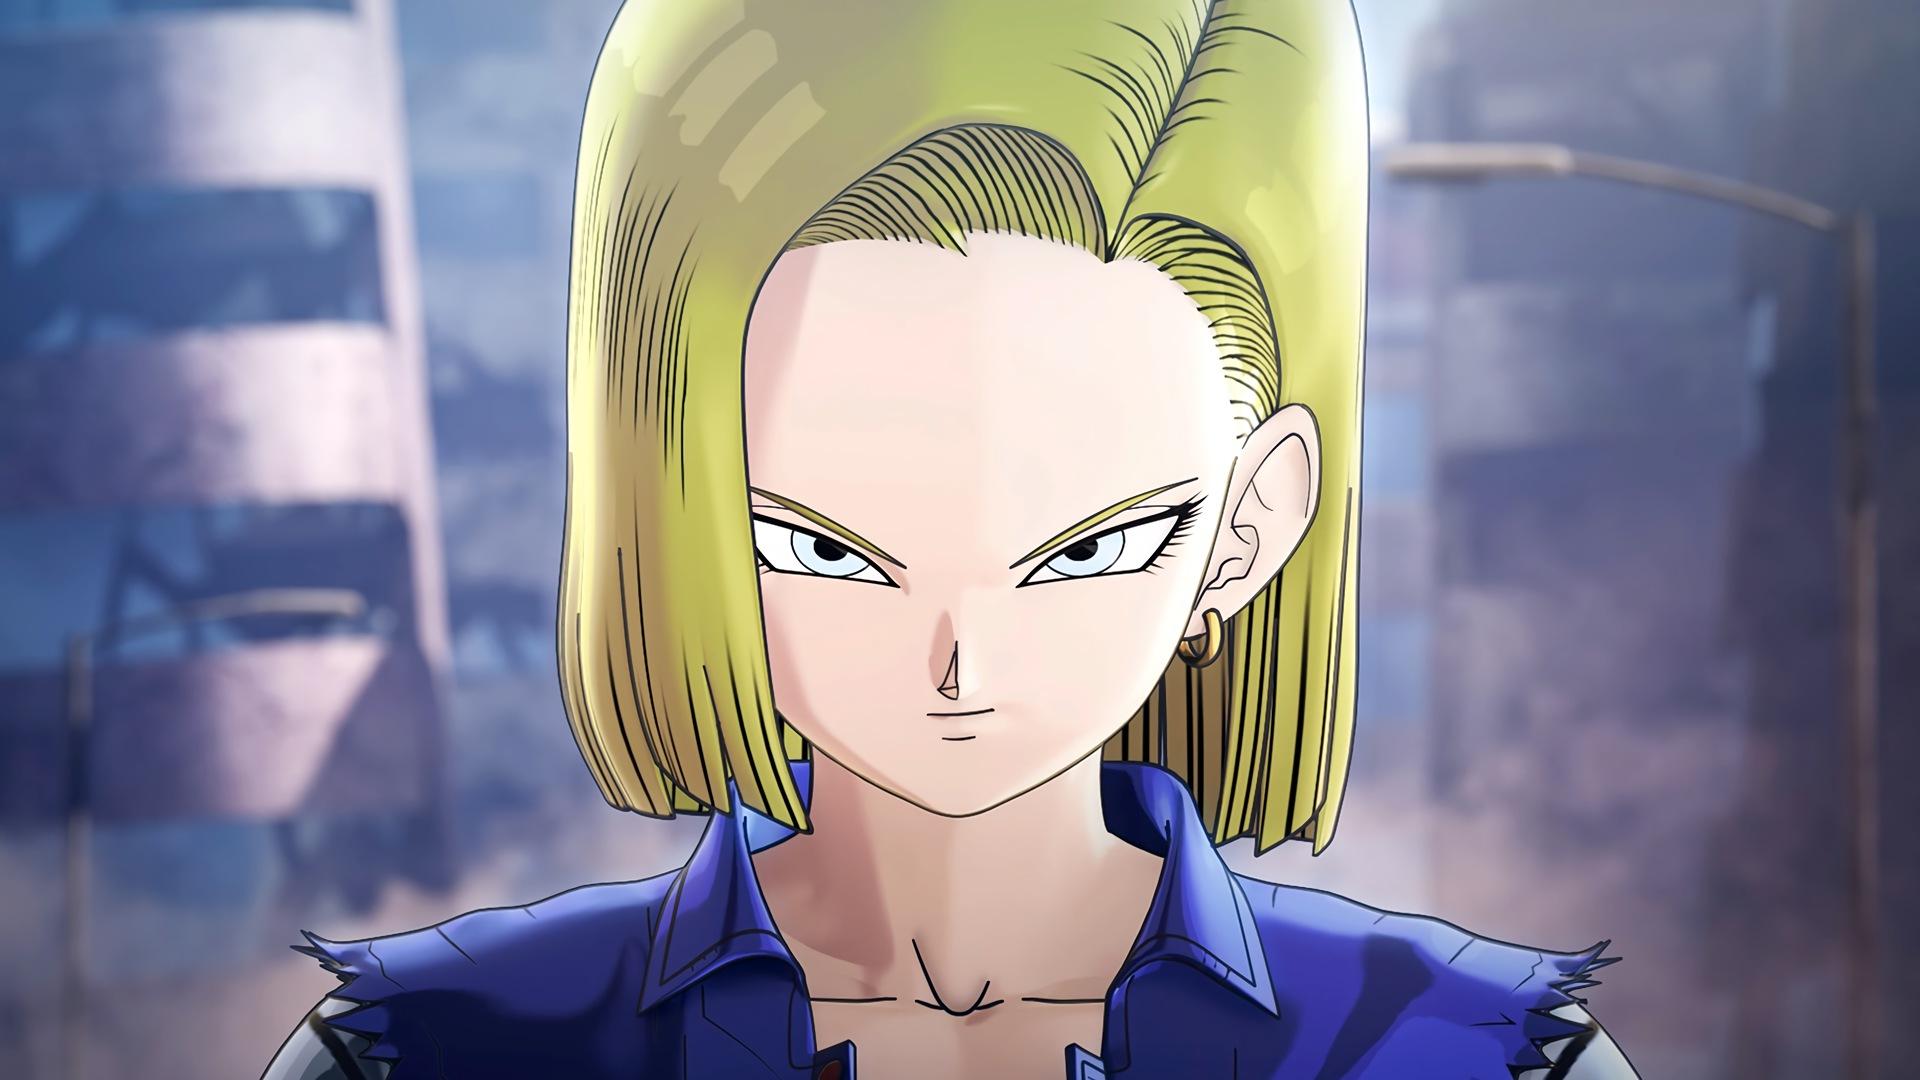 Android 17 Wallpaper. Android Wallpaper